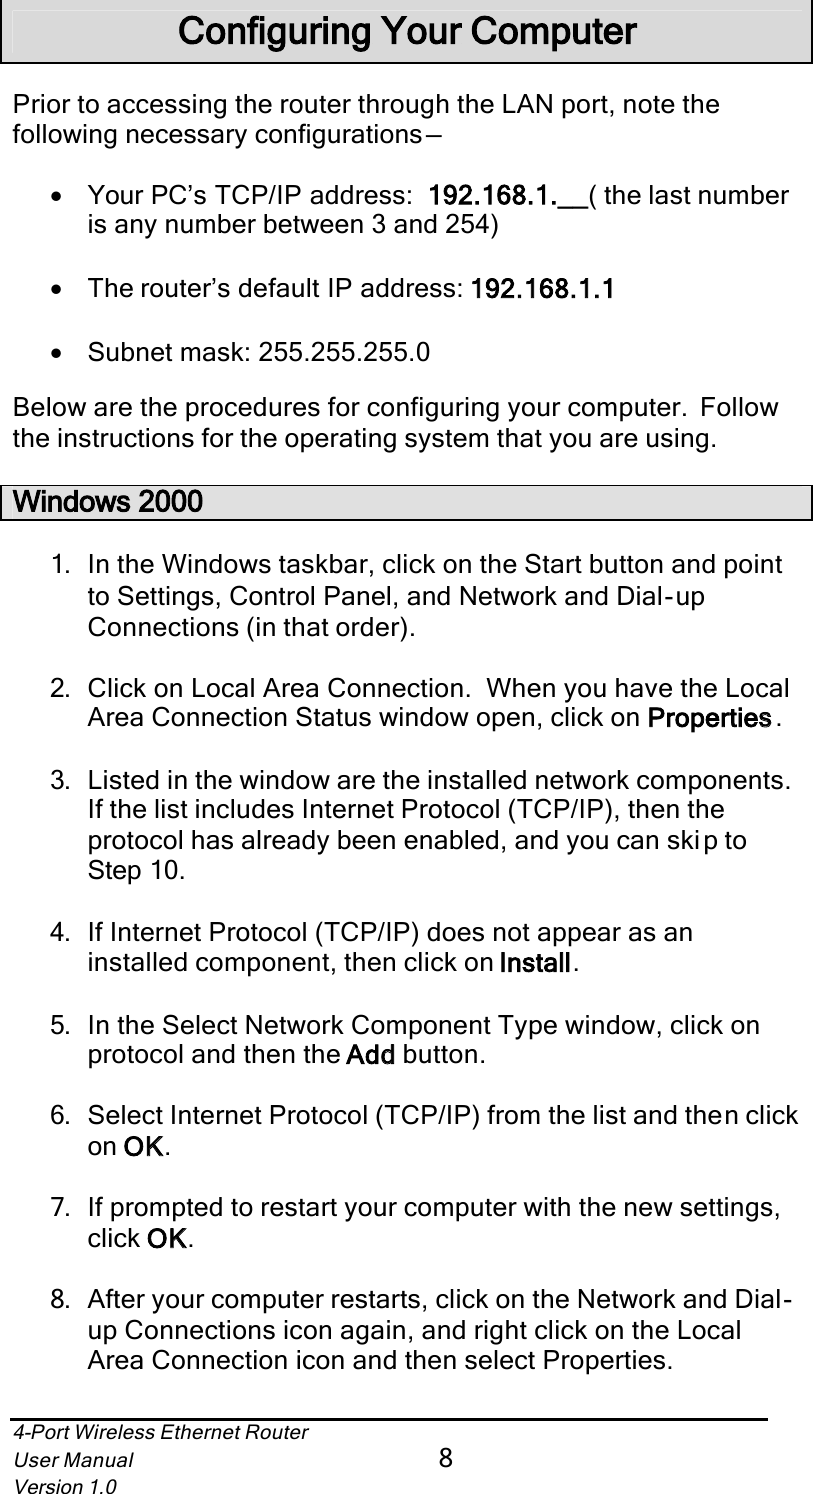 4-Port Wireless Ethernet RouterUser Manual8Version 1.0Configuring Your ComputerPrior to accessing the router through the LAN port, note the following necessary configurations —•Your PC’s TCP/IP address: 192.168.1.___( the last number is any number between 3 and 254)•The router’s default IP address: 192.168.1.1•Subnet mask: 255.255.255.0Below are the procedures for configuring your computer.  Follow the instructions for the operating system that you are using.Windows 20001. In the Windows taskbar, click on the Start button and point to Settings, Control Panel, and Network and Dial-upConnections (in that order).2. Click on Local Area Connection.  When you have the Local Area Connection Status window open, click on Propertiess.3. Listed in the window are the installed network components.If the list includes Internet Protocol (TCP/IP), then the protocol has already been enabled, and you can skip to Step 10.4. If Internet Protocol (TCP/IP) does not appear as an installed component, then click on Installl.5. In the Select Network Component Type window, click on protocol and then the Addd button.6. Select Internet Protocol (TCP/IP) from the list and then click on OKK.7. If prompted to restart your computer with the new settings, click OKK.8. After your computer restarts, click on the Network and Dial-up Connections icon again, and right click on the Local Area Connection icon and then select Properties.